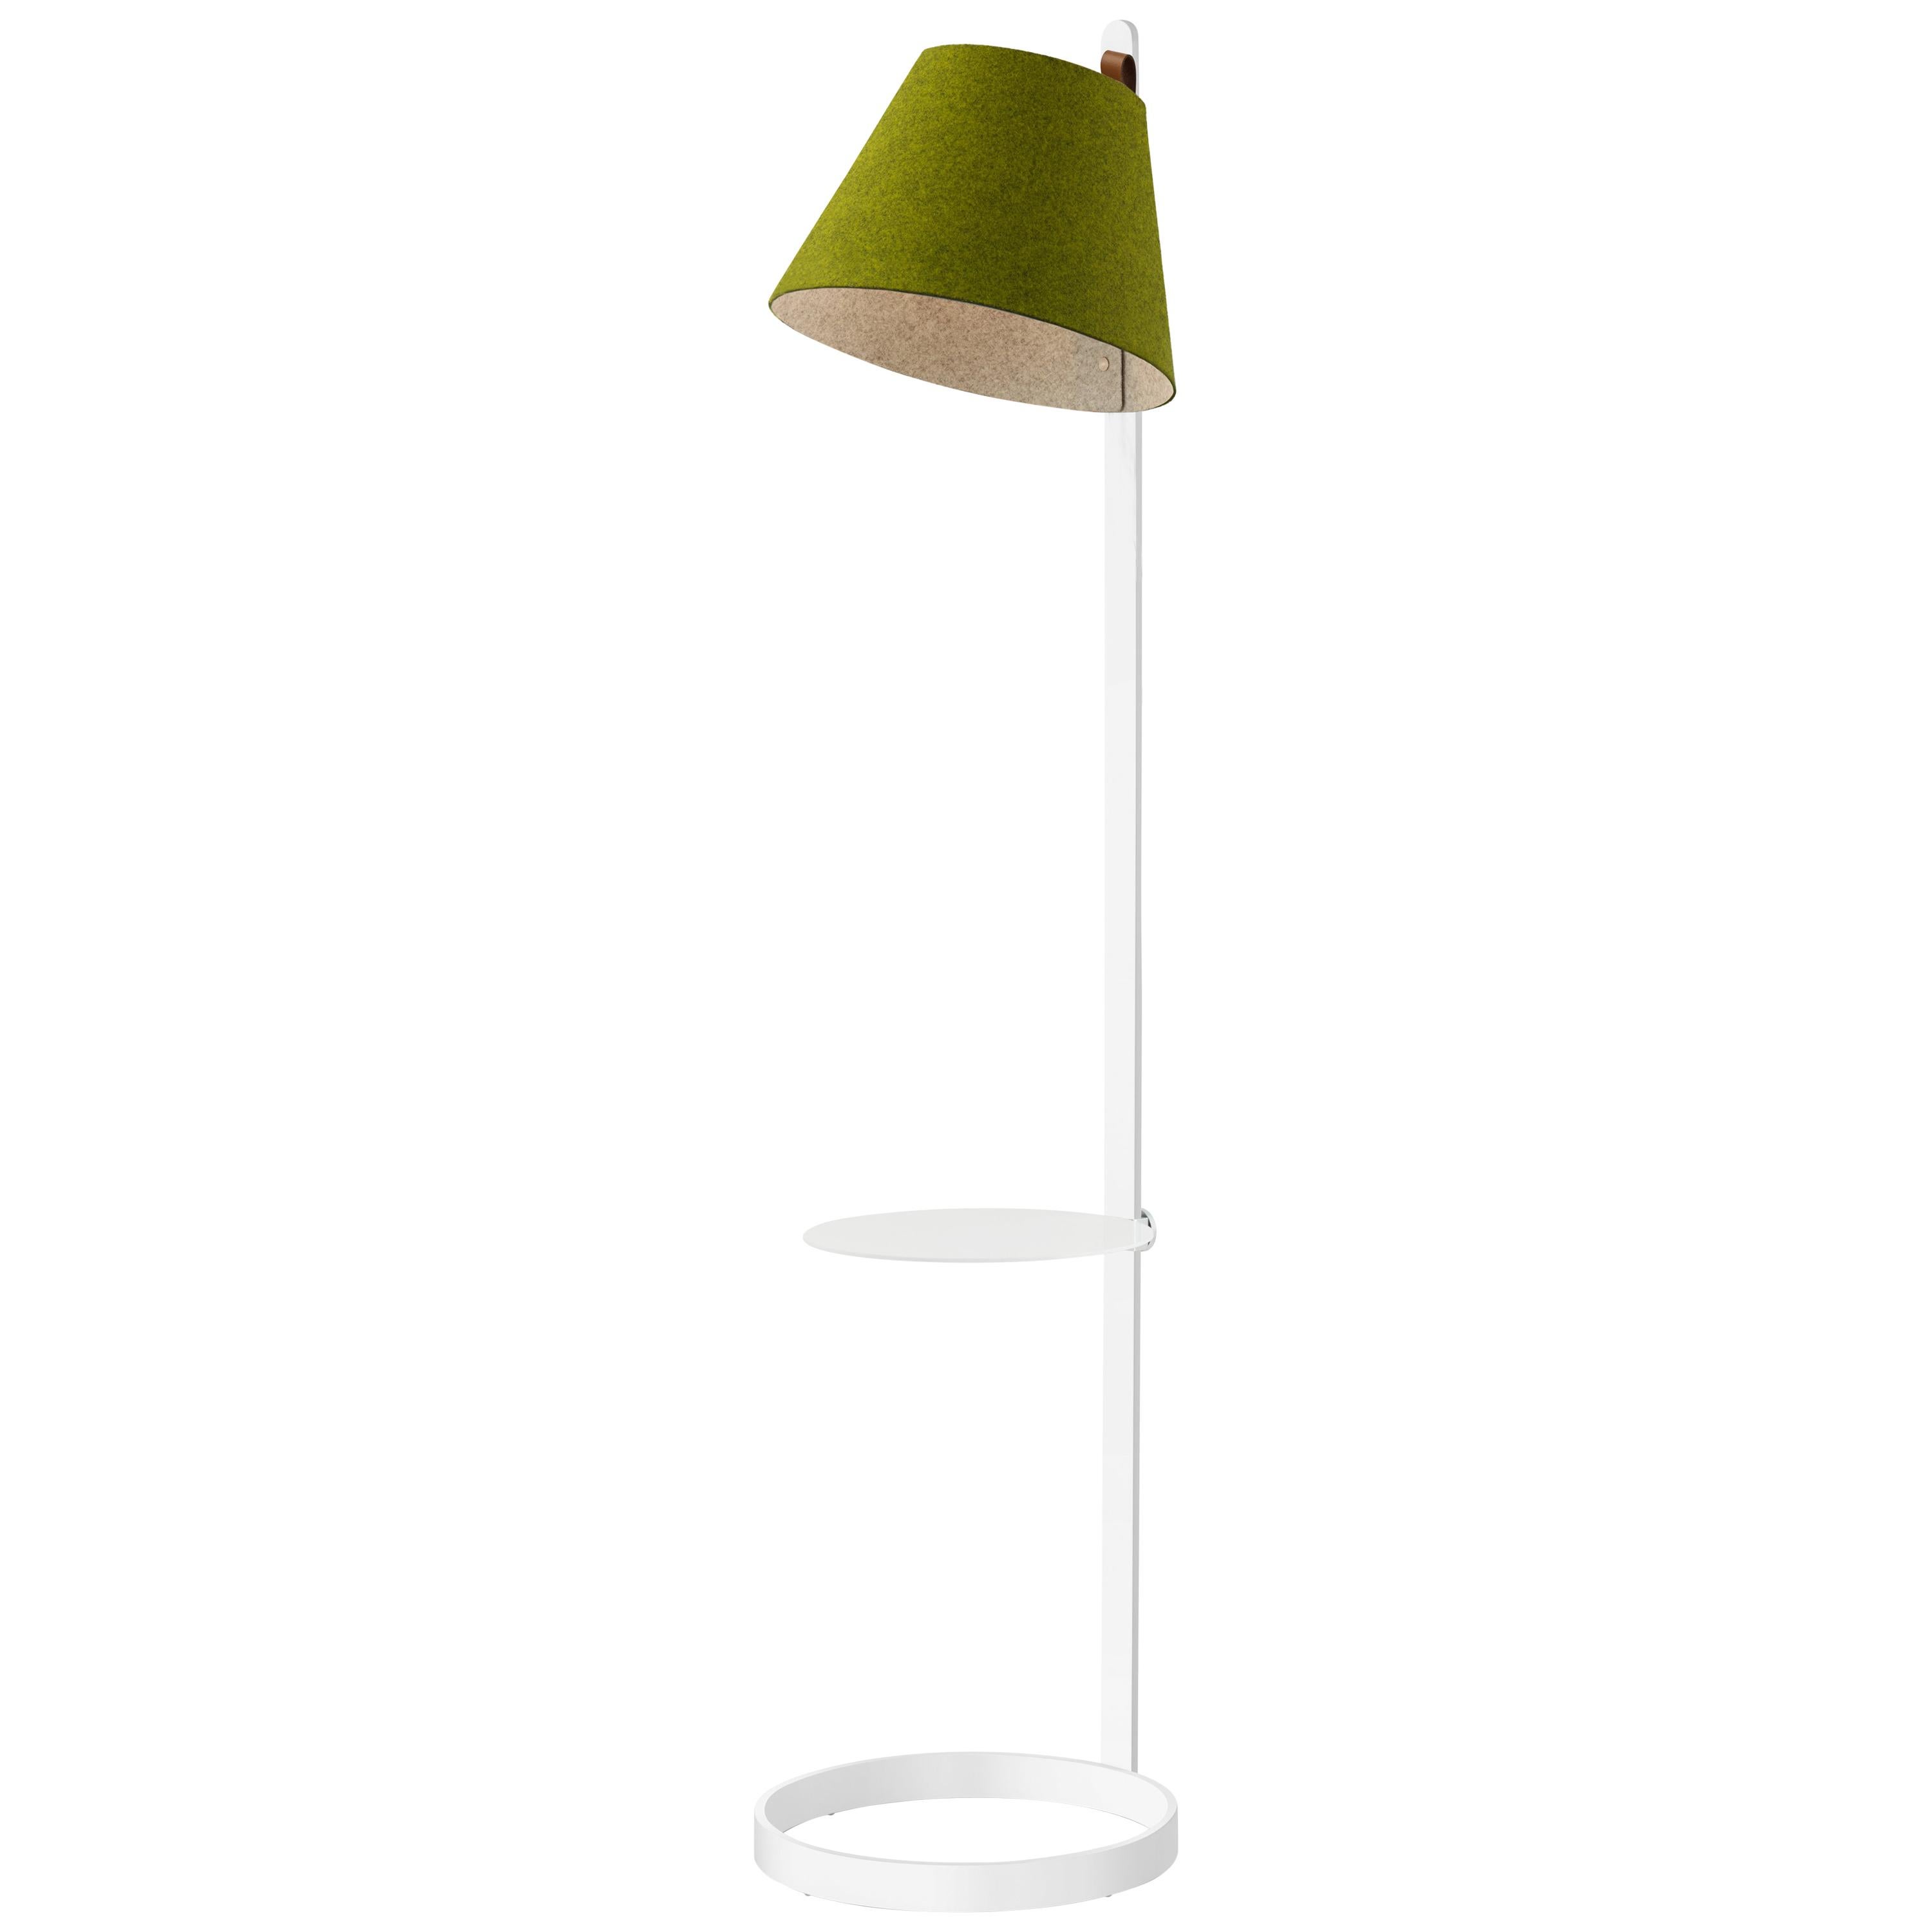 Lana Floor Lamp in Moss and Grey with Tray and White Base by Pablo Designs